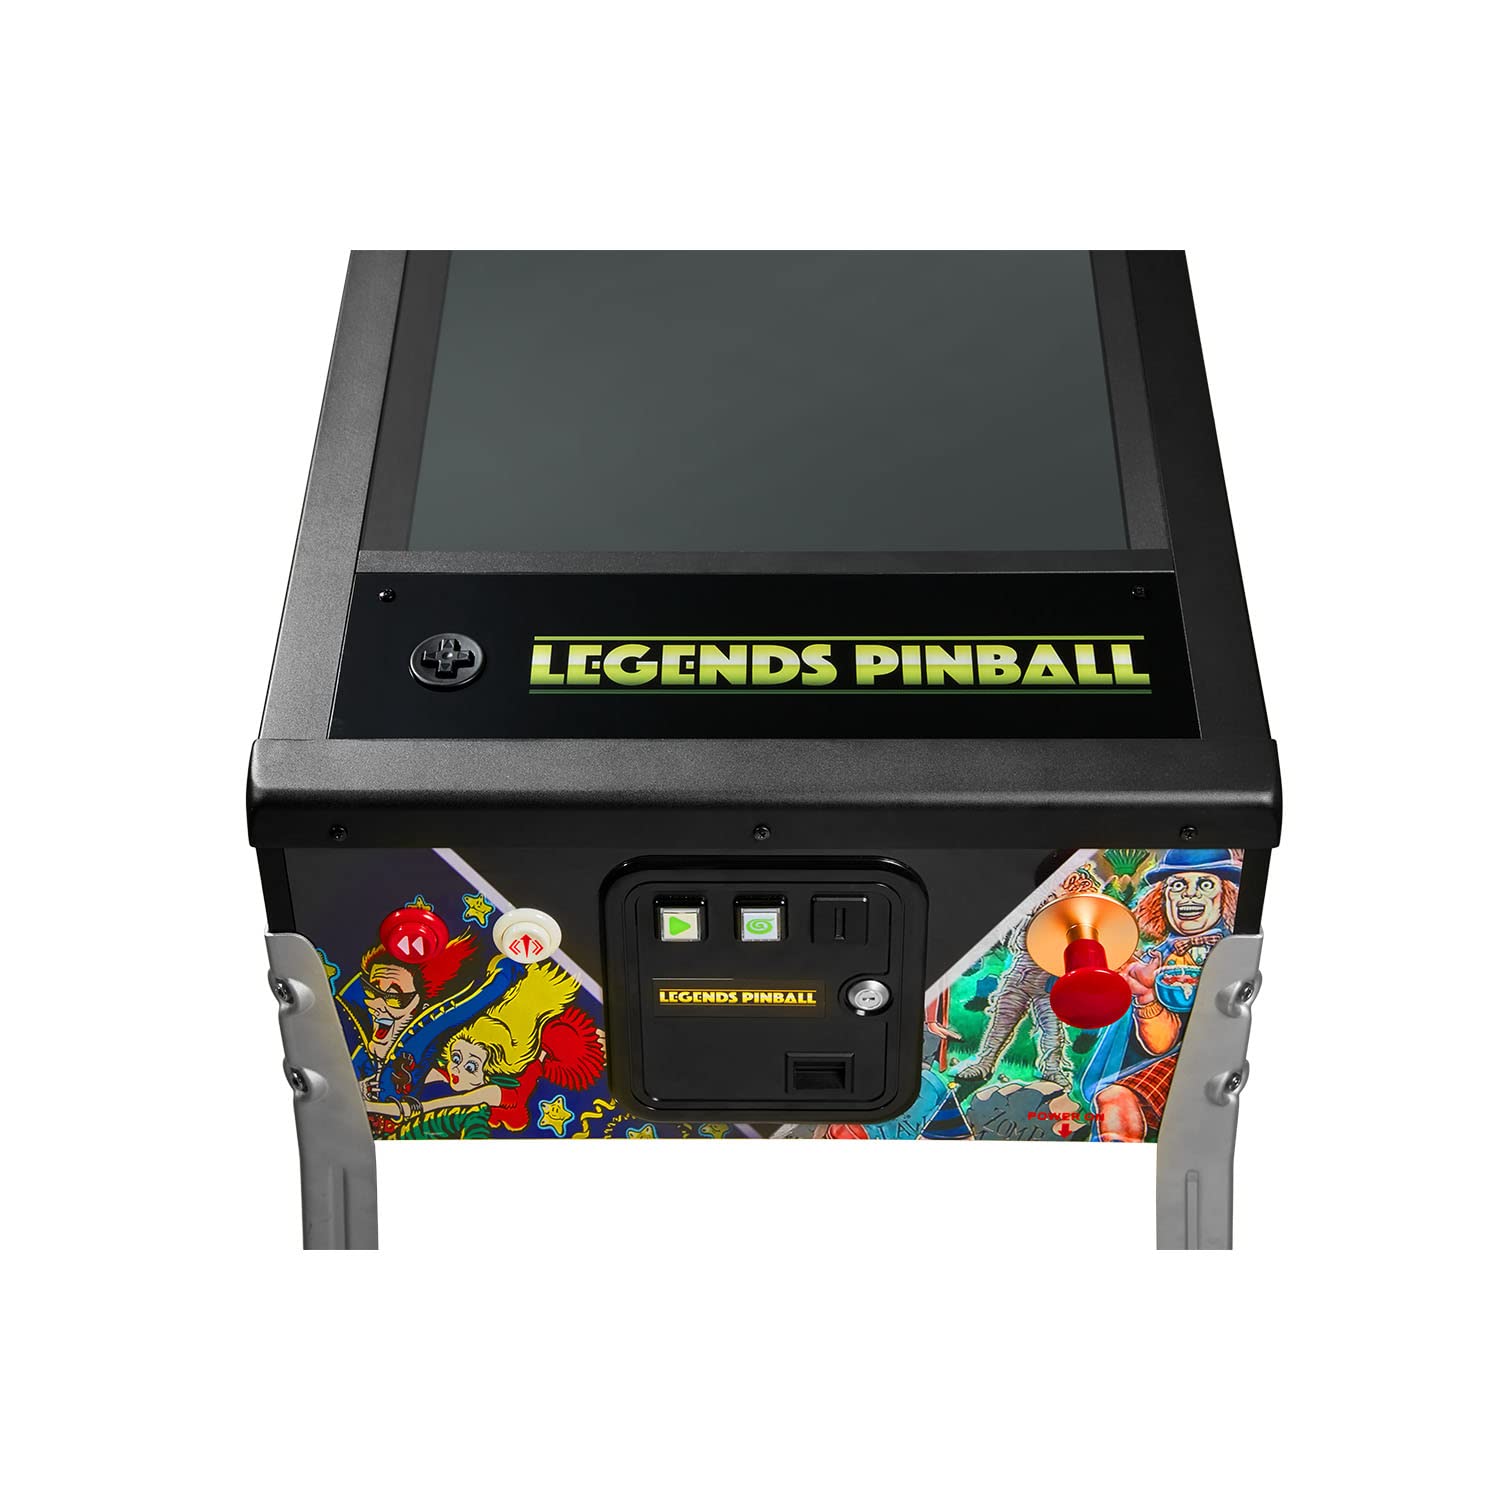 Legends Pinball, Full Size Arcade Machine, Home Arcade, Classic Retro Video Games, 22 Built in Licensed Genre-Defining Pinball Games, Black Hole, Haunted House, Rescue 911, WiFi, HDMI, Bluetooth.